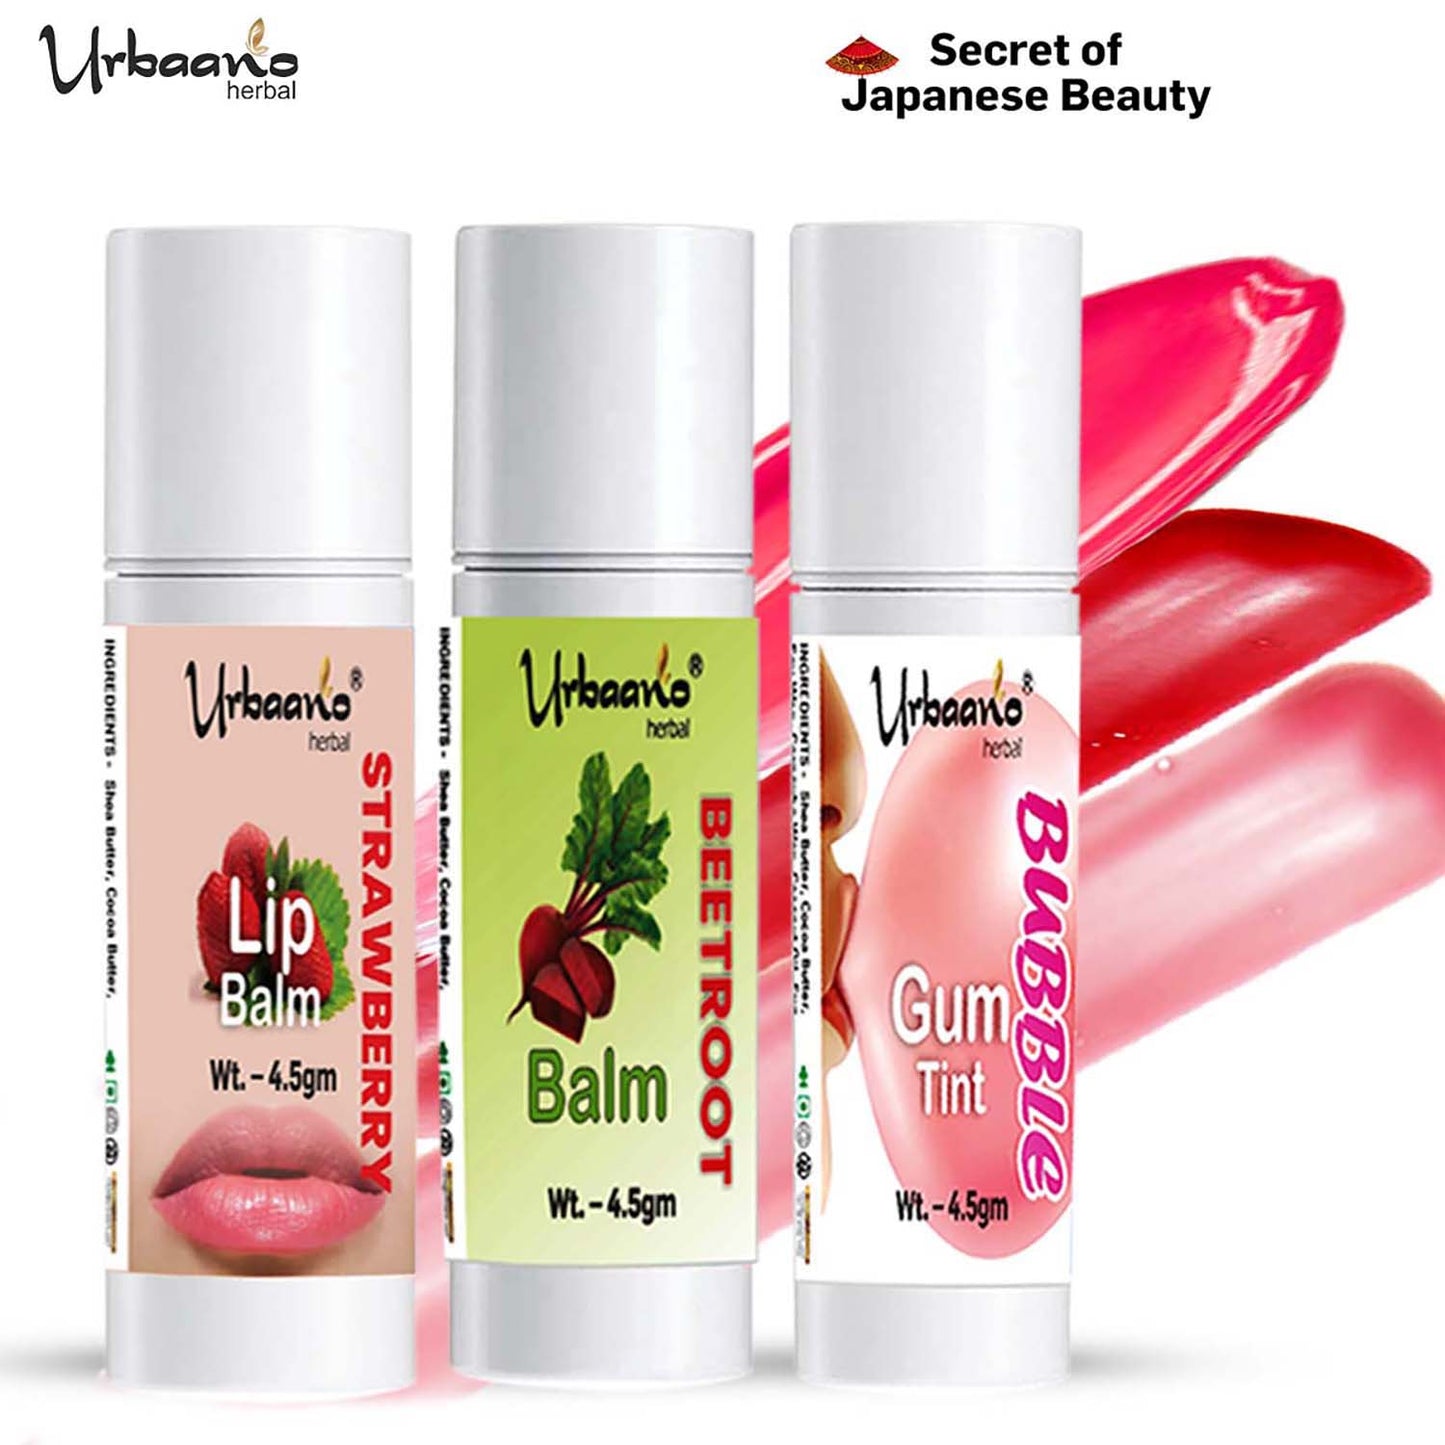 urbaano herbal tint lip balm strawberry, bubblegum, beetroot pure & natural with organic oils different shades of pink